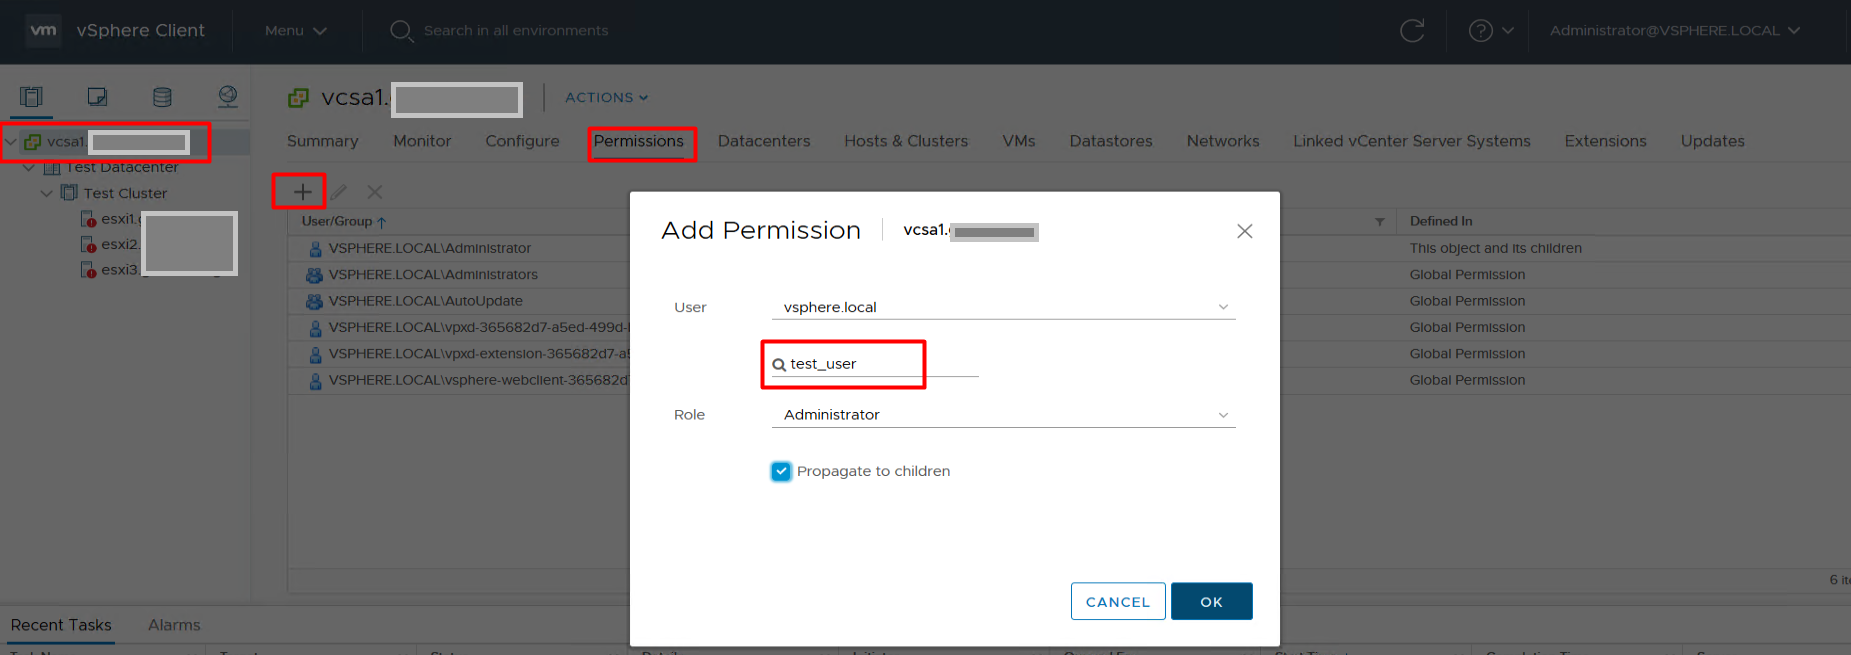 Add user permissions to vCenter Server